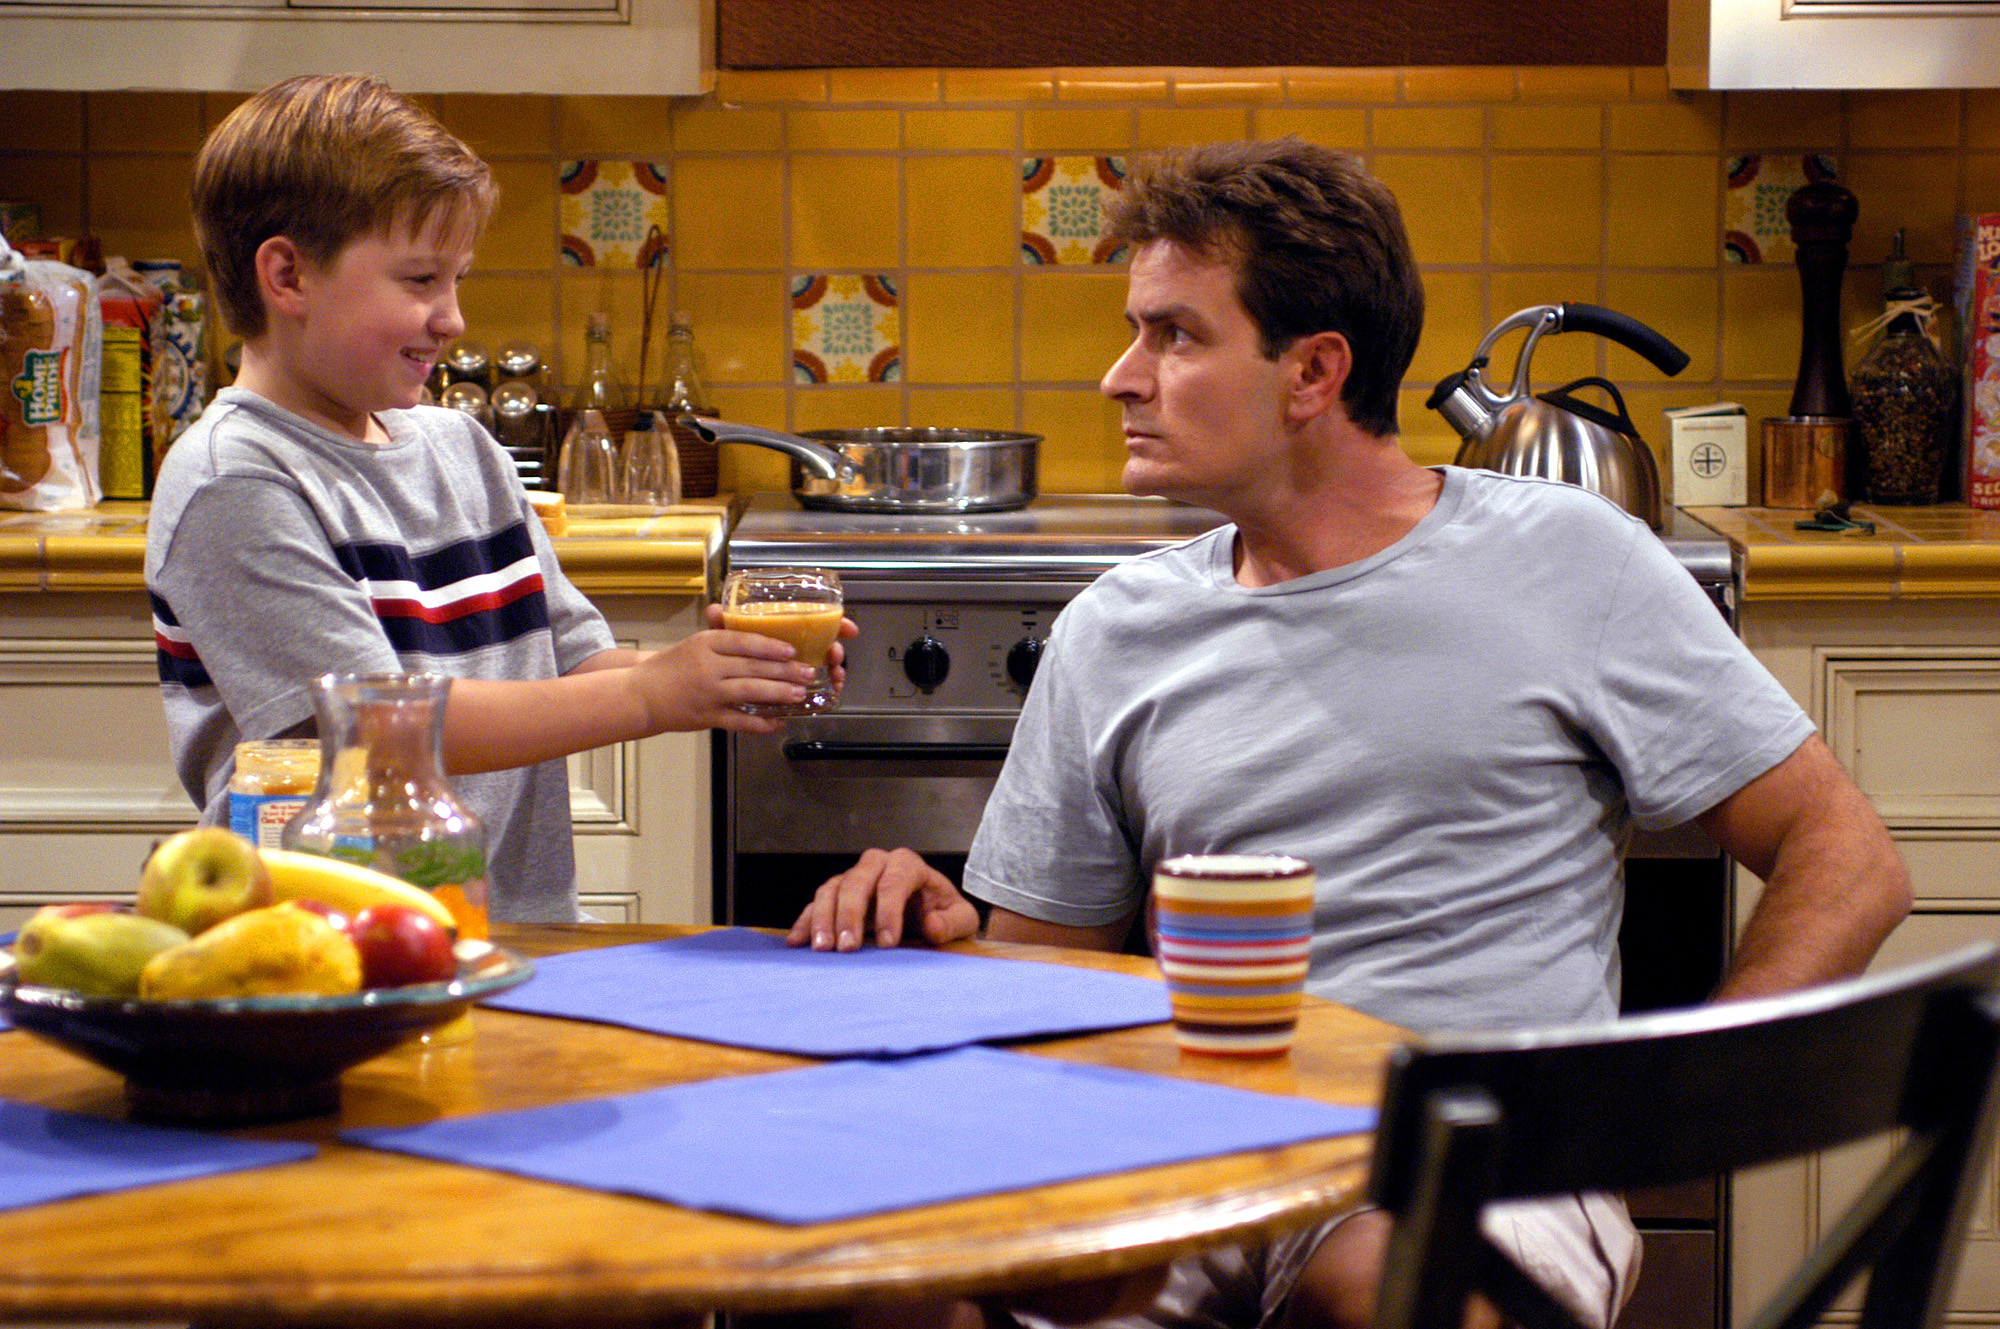 Angus T. Jones and Charlie Sheen on "Two and A Half Men" in 2003 | Source: Getty Images